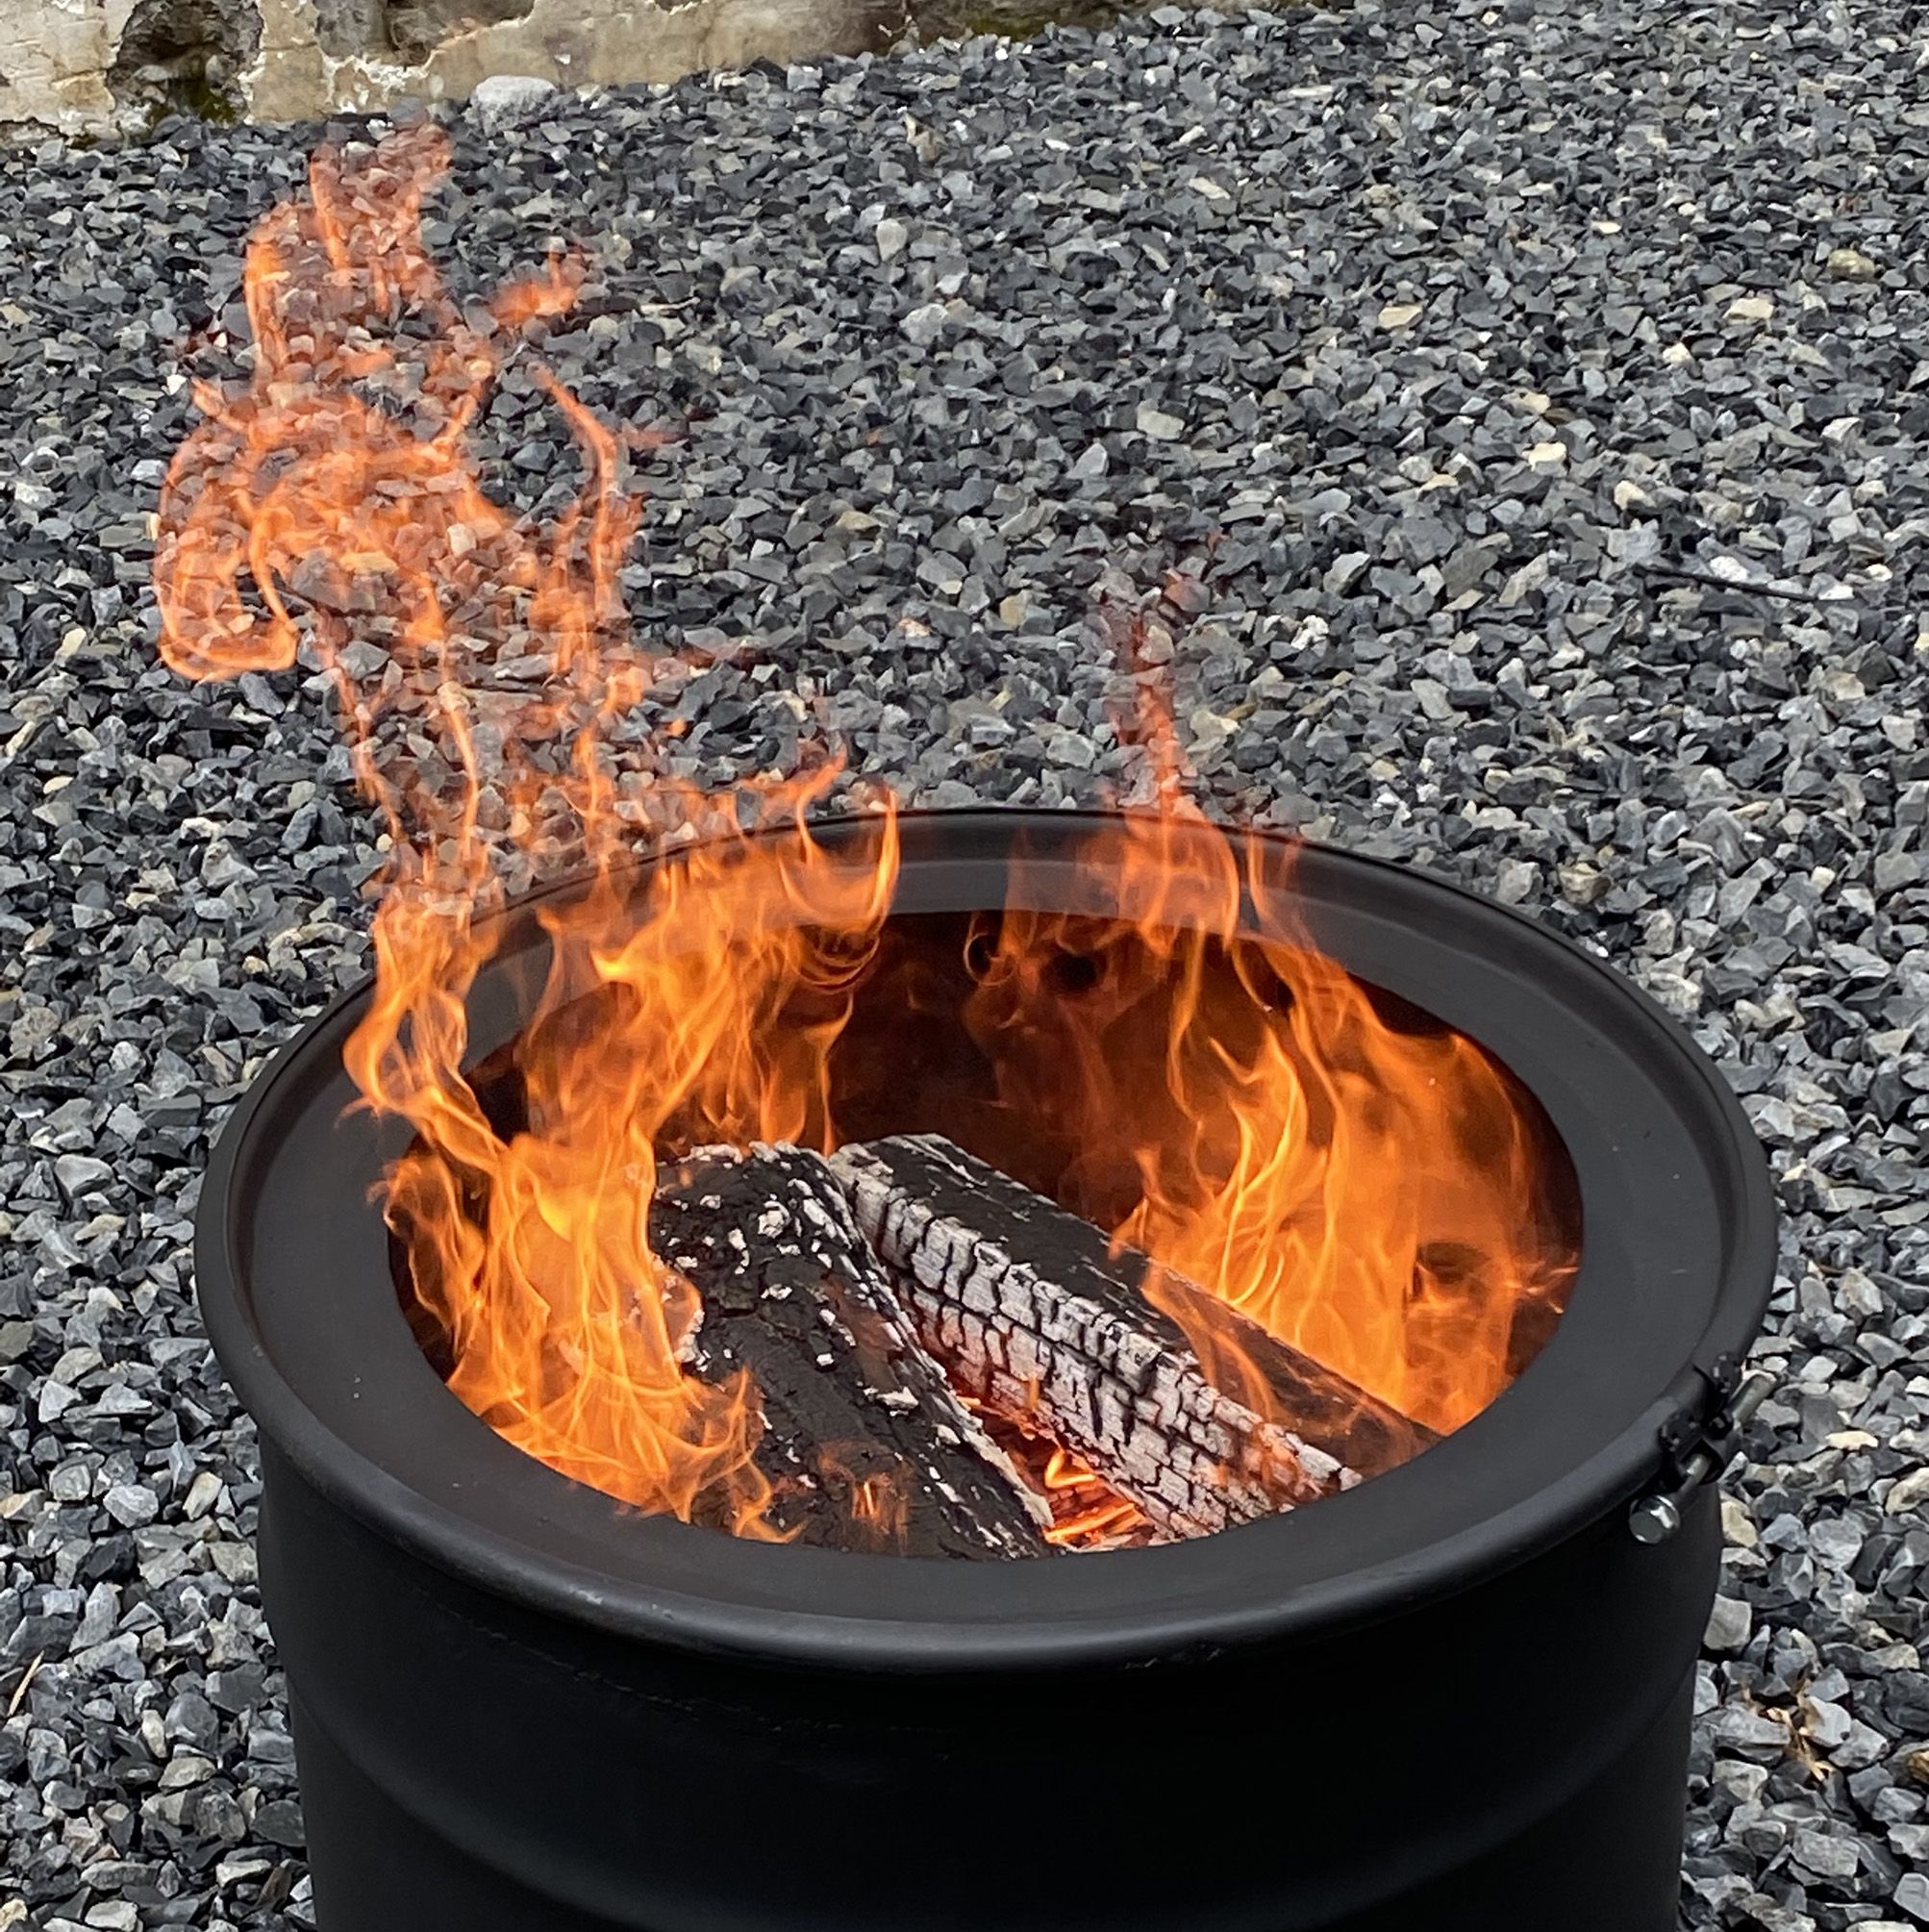 How to Build Your Own DIY Smokeless Fire Pit